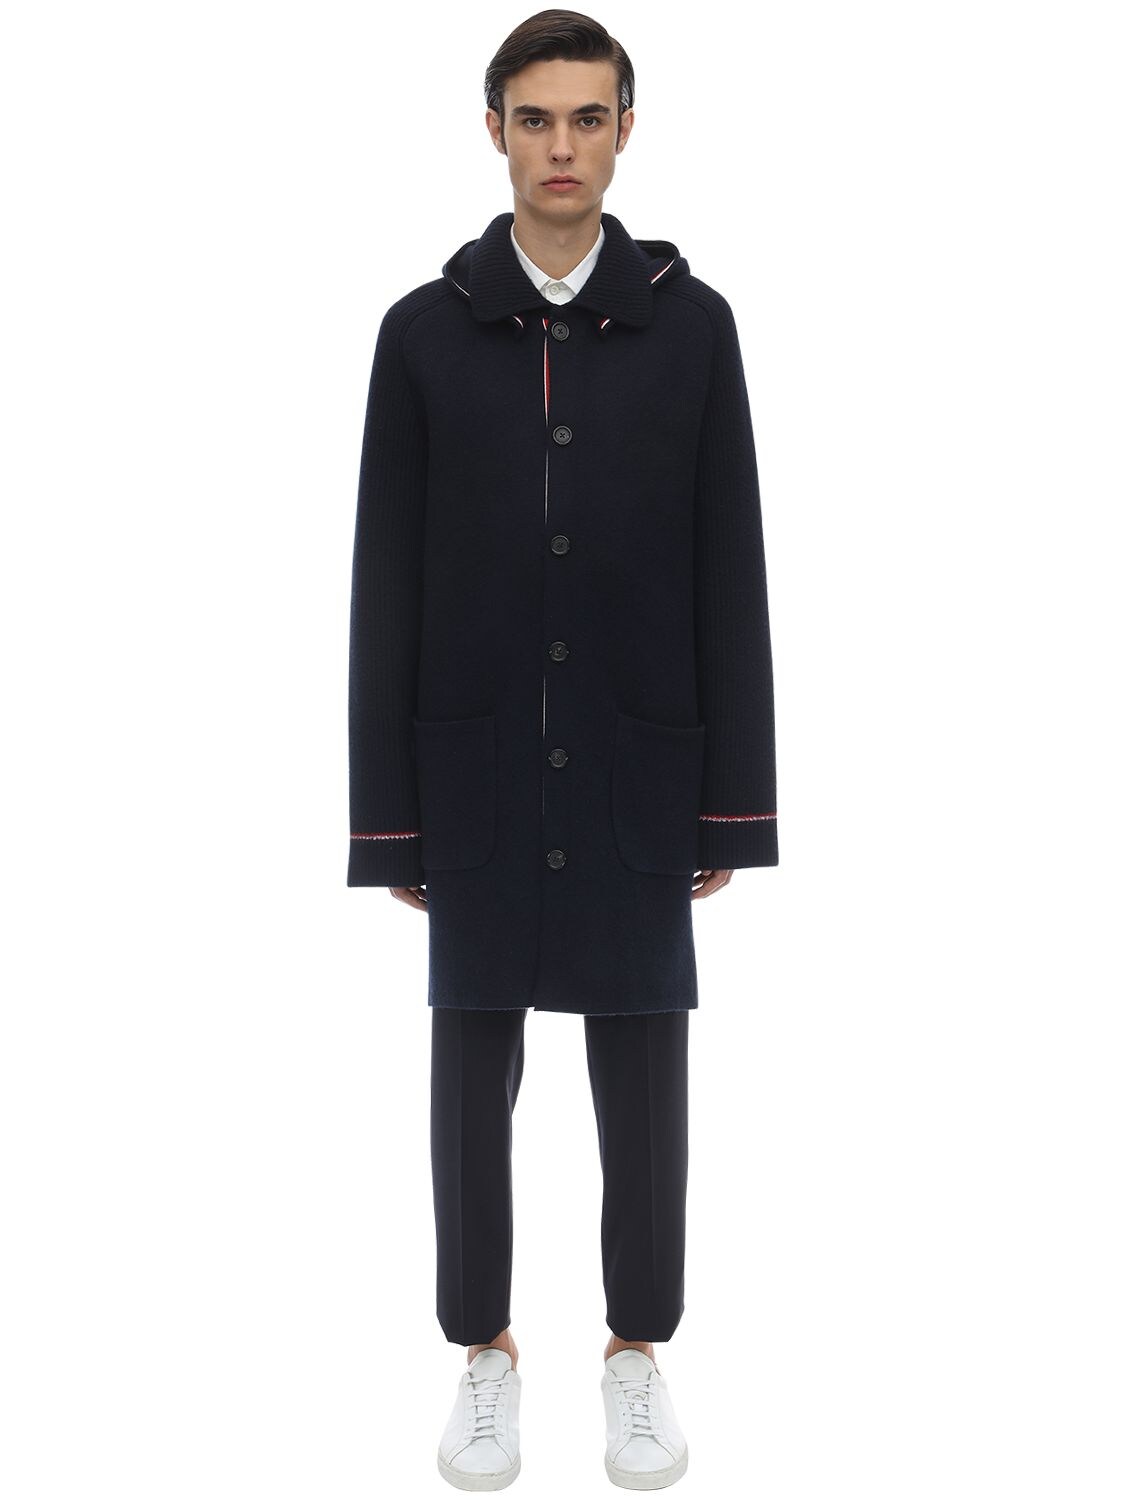 Thom Browne Hooded Wool & Cashmere Knit Duffle Coat In Navy